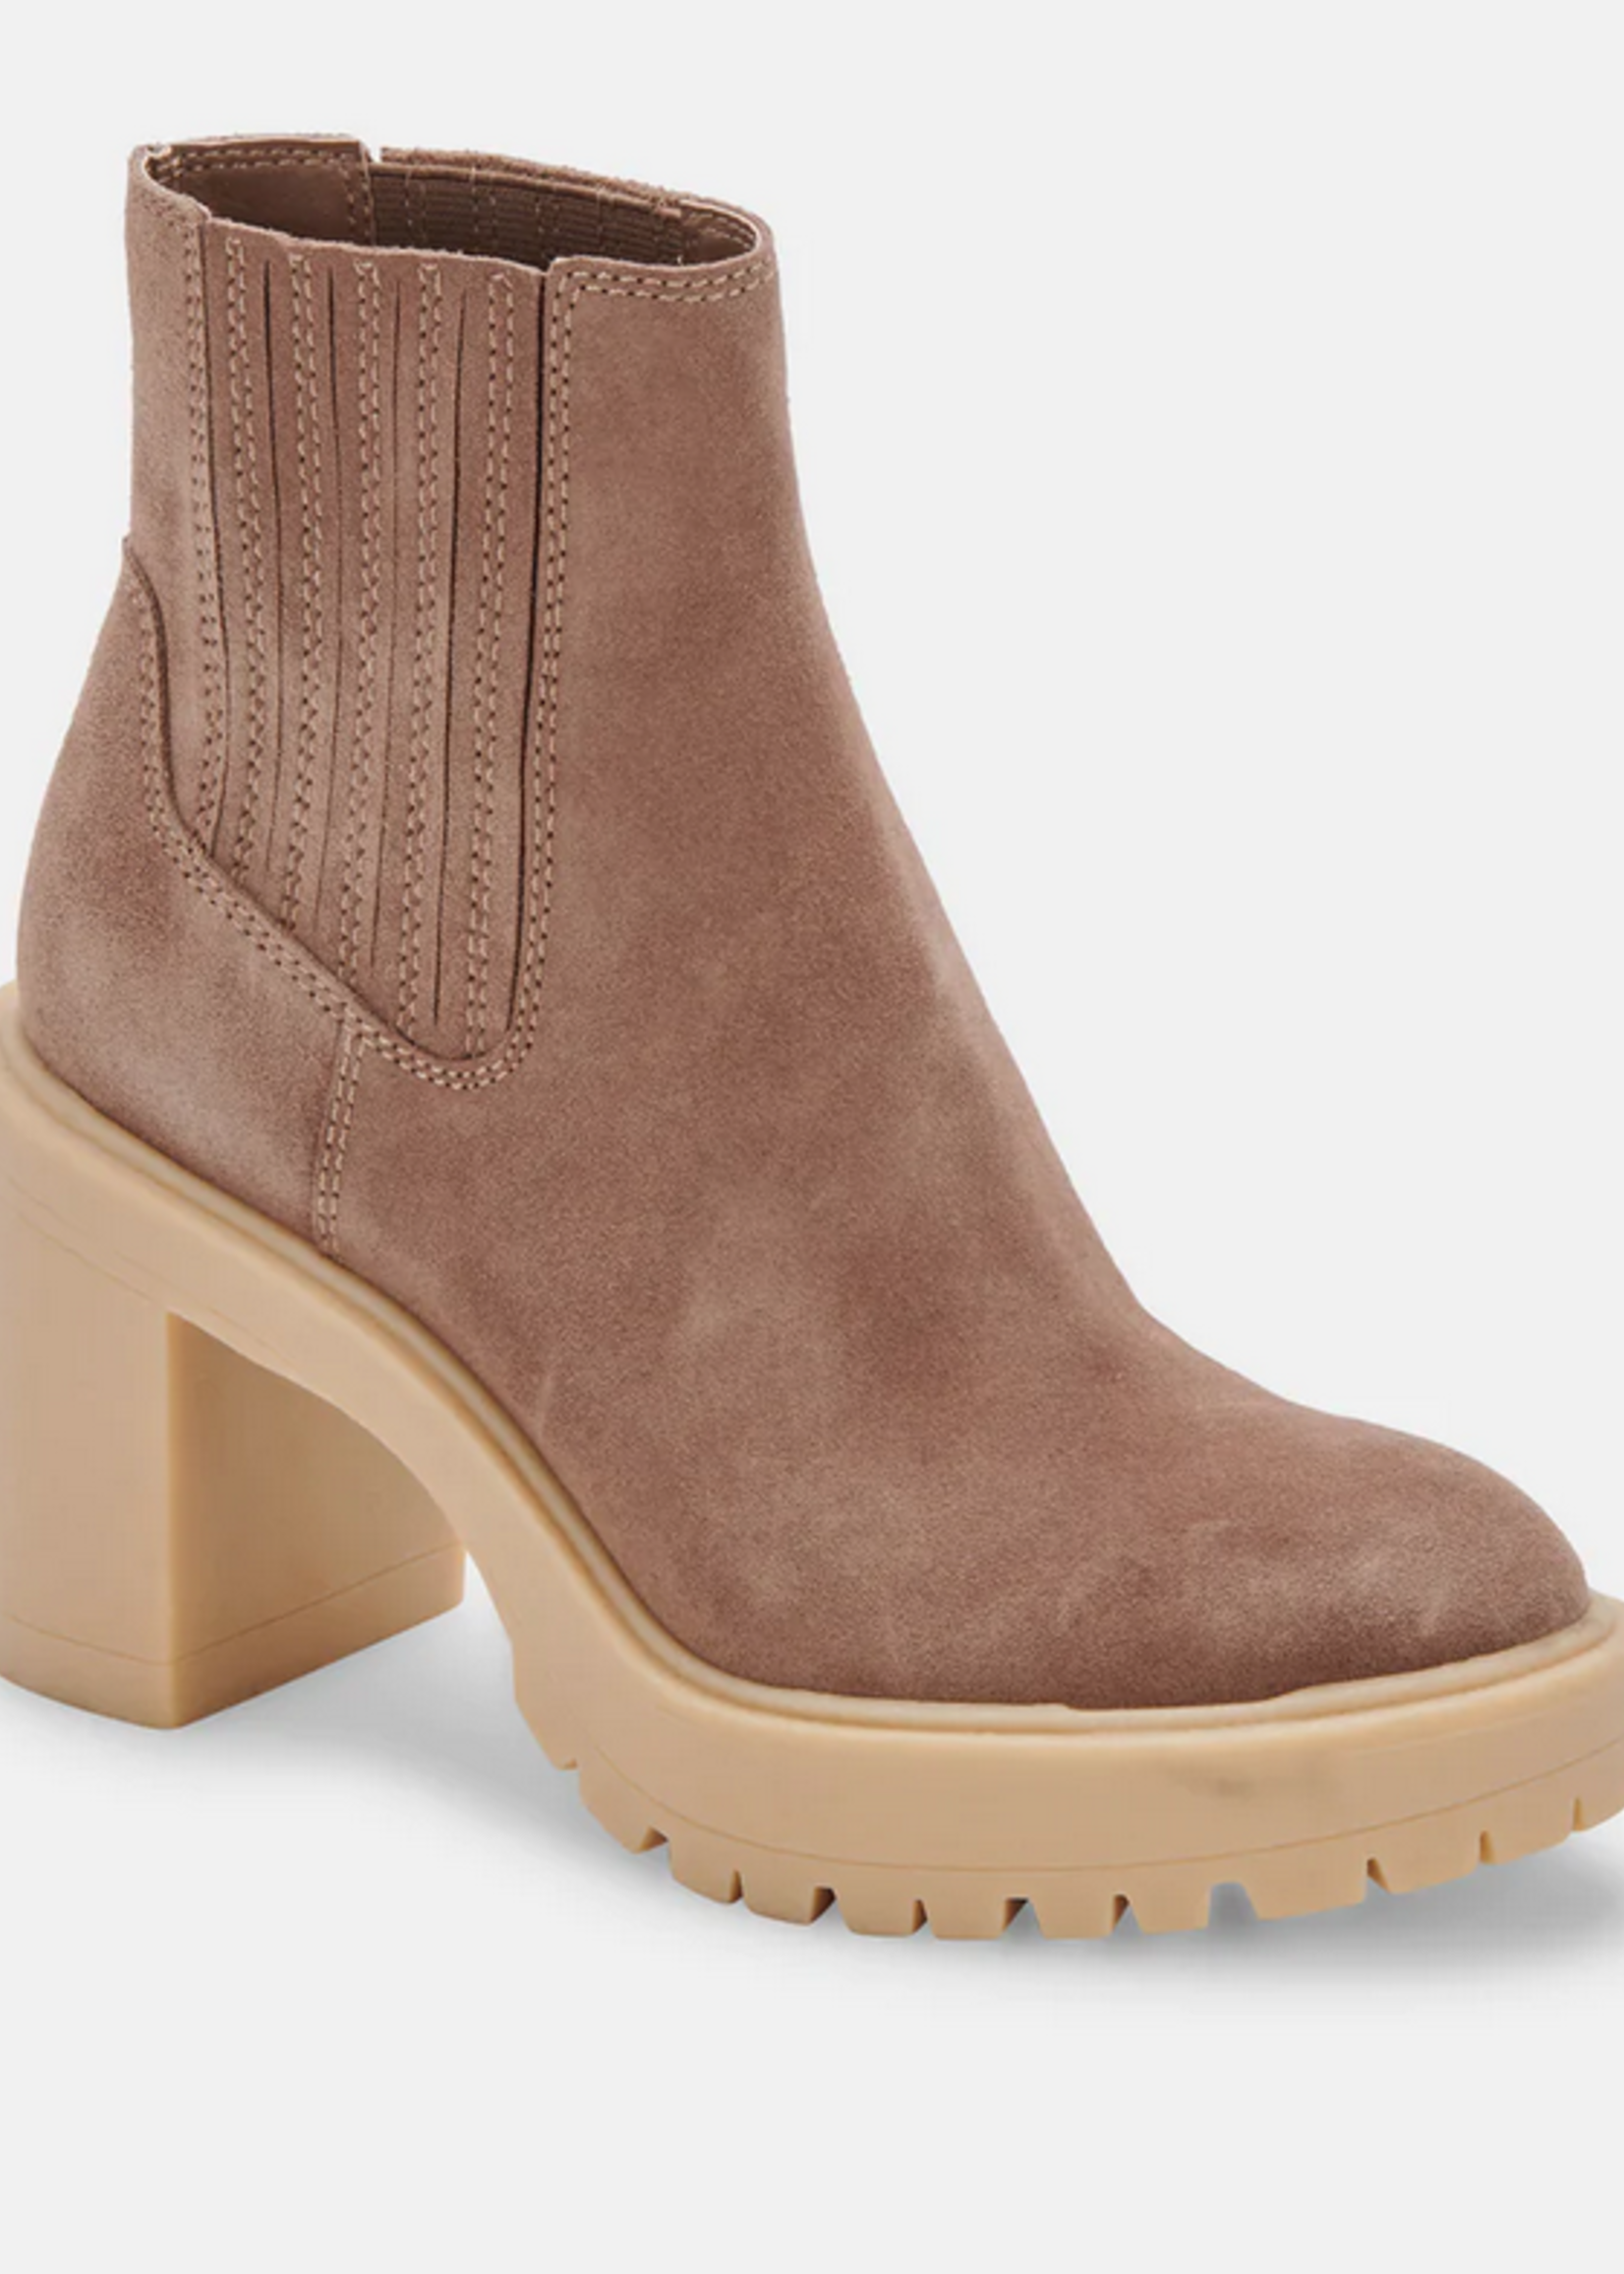 DOLCE VITA CASTER H20 BOOTIES